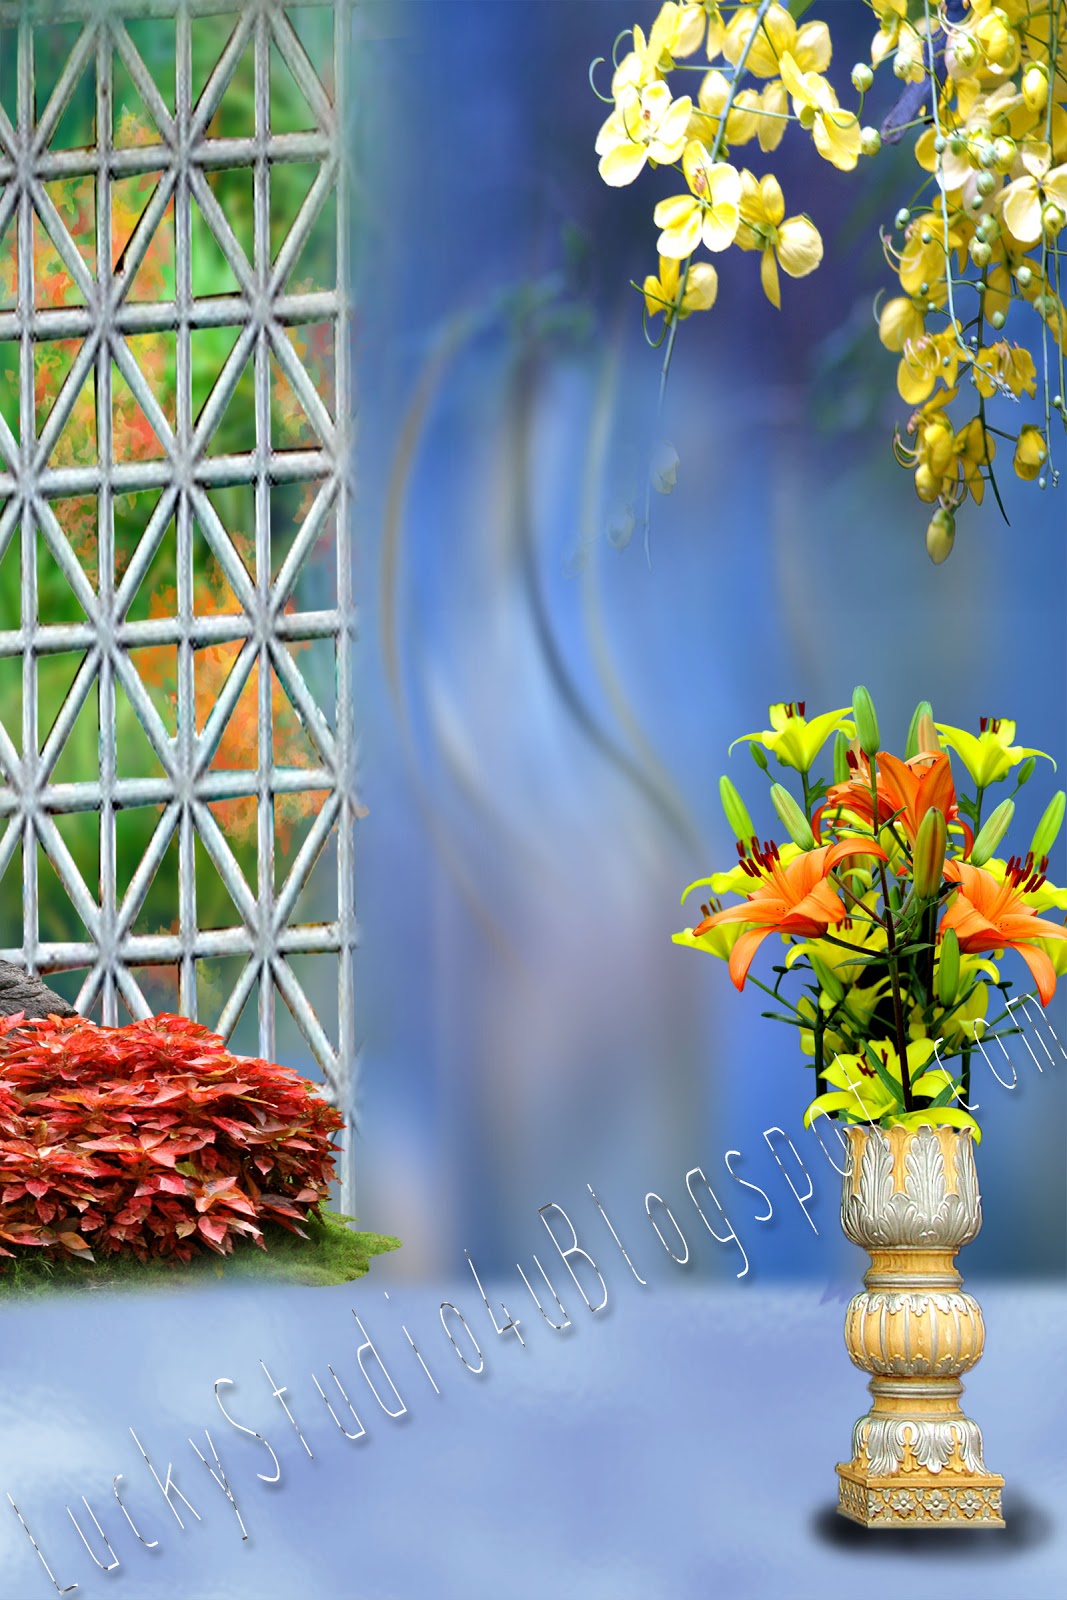 New Studio Backgrounds Photo Editing Free Download ...